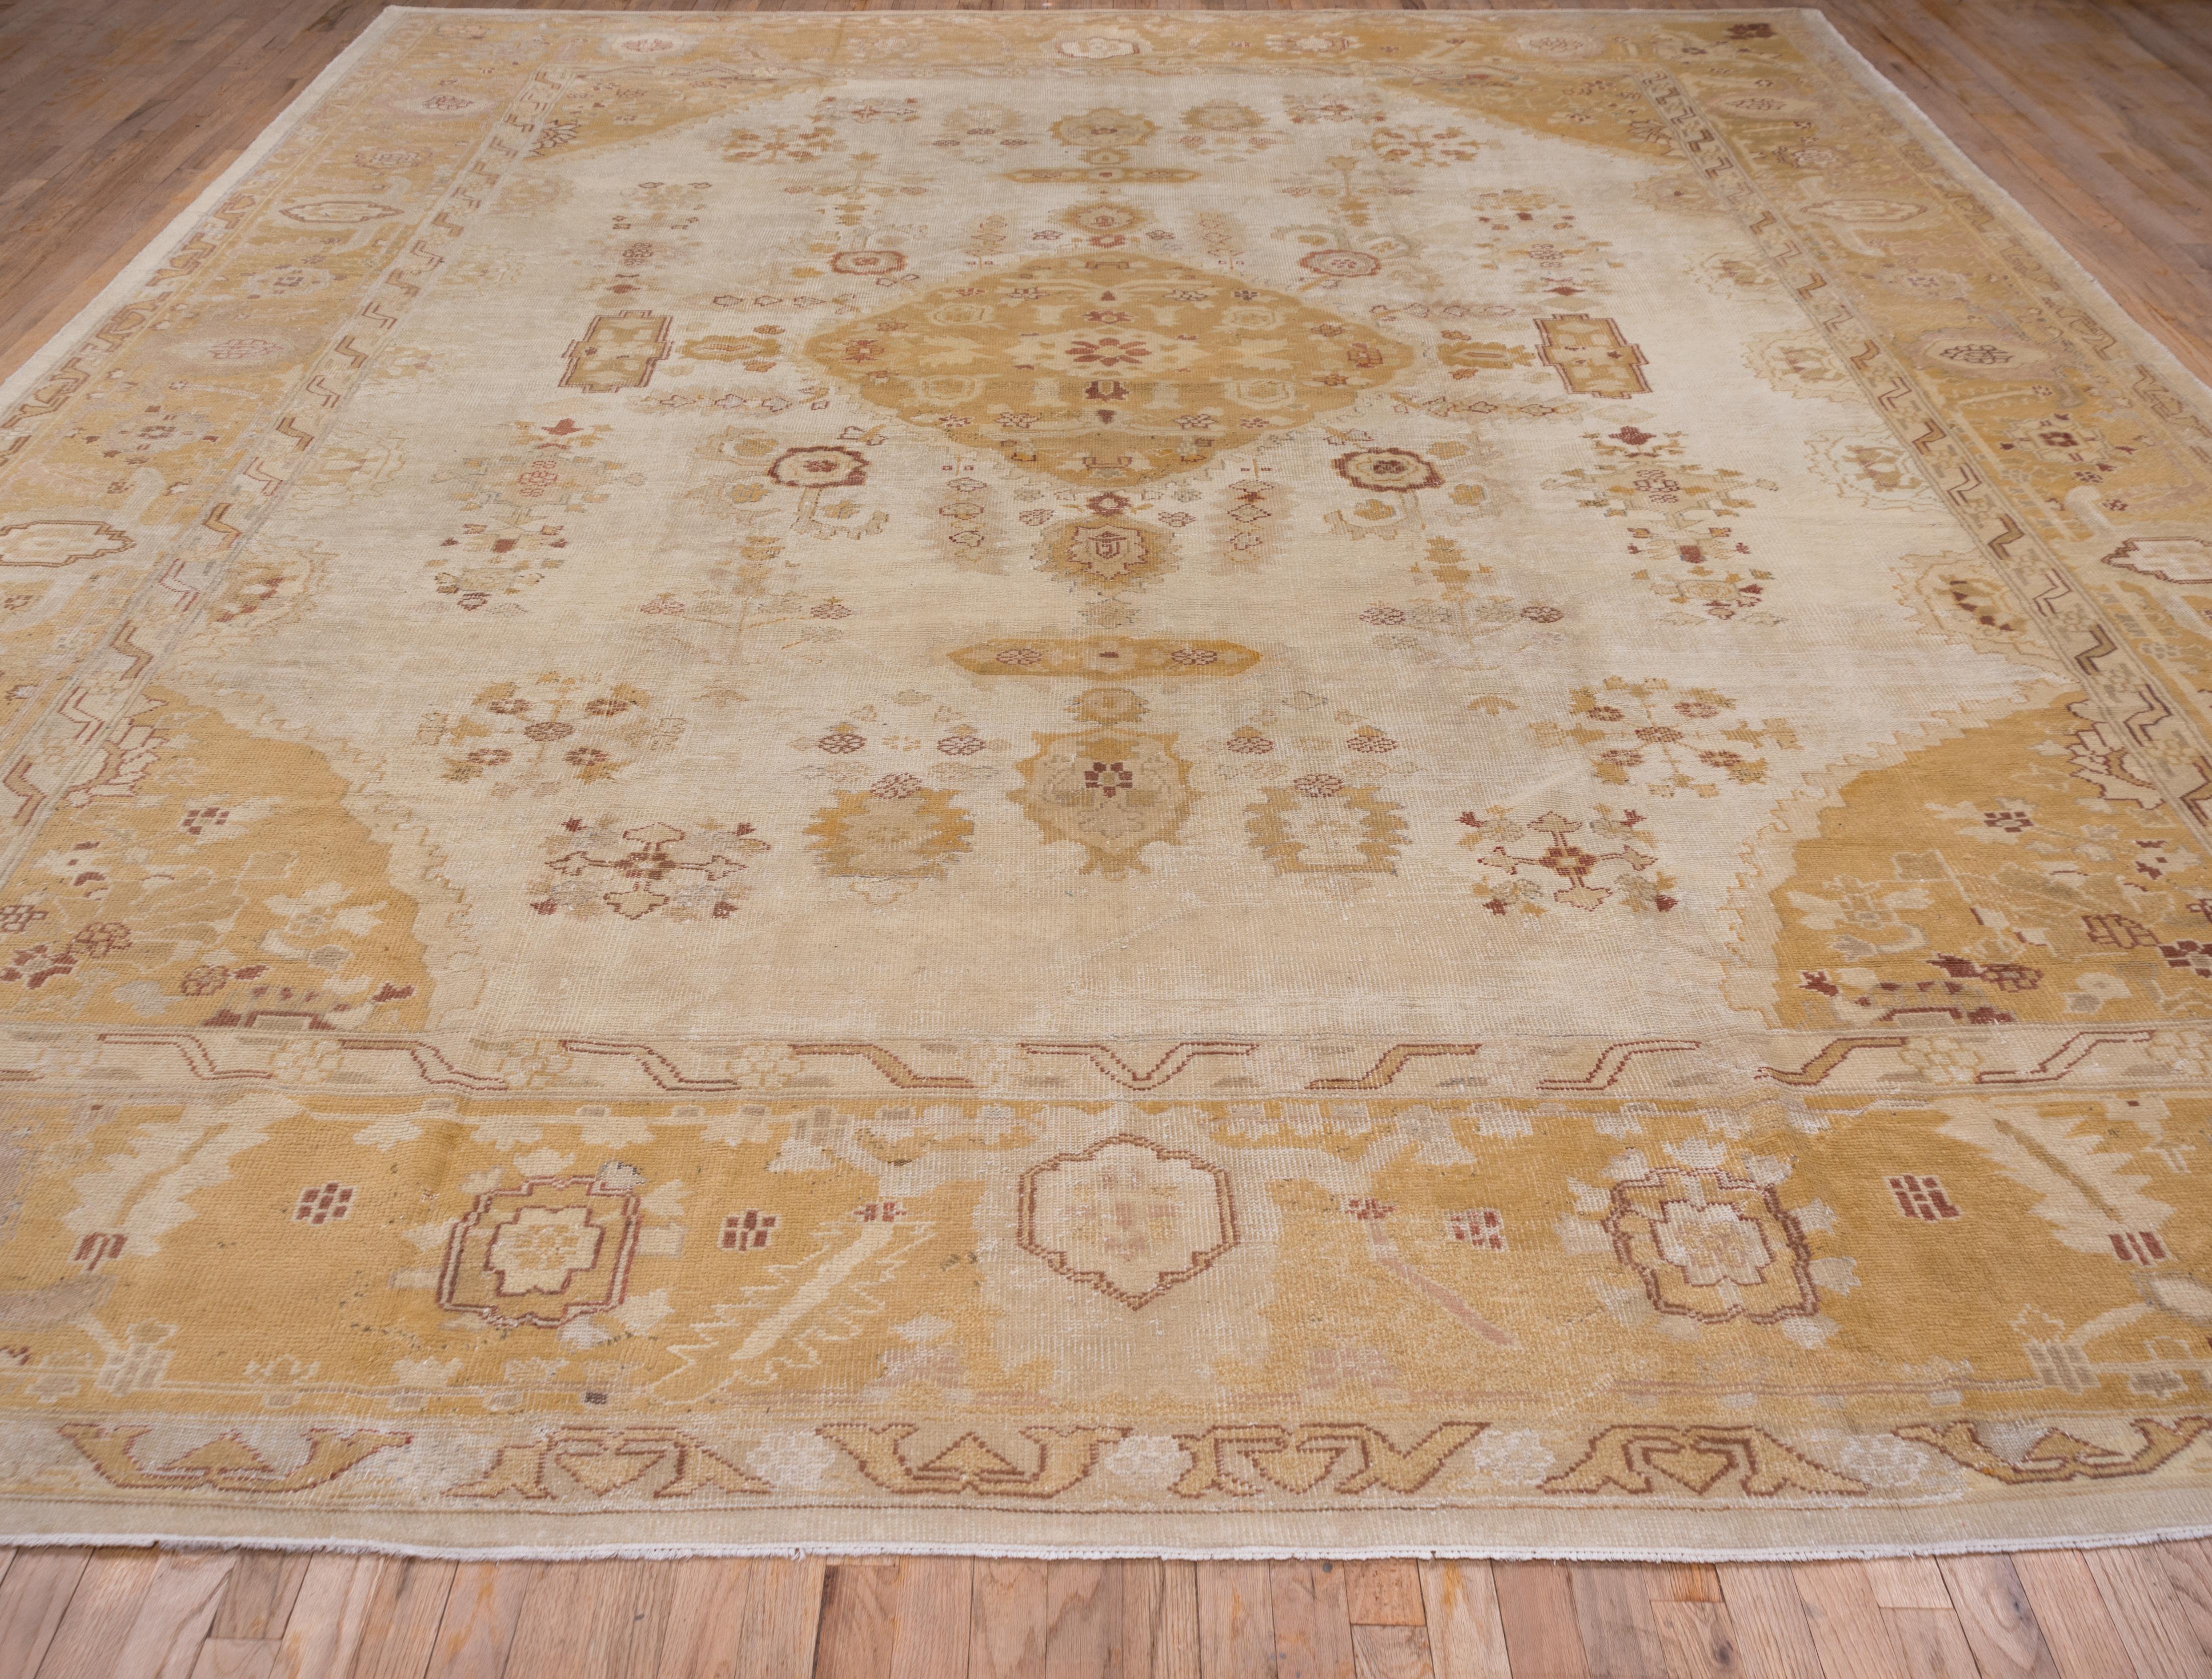 The eggshell beige field of this west Turkish town carpet presents a gently scalloped small diamond medallion with four cartouche pendants, all in brown tones. Palmettes, radiating bud arrays and floating floral elements are comfortably spaced.